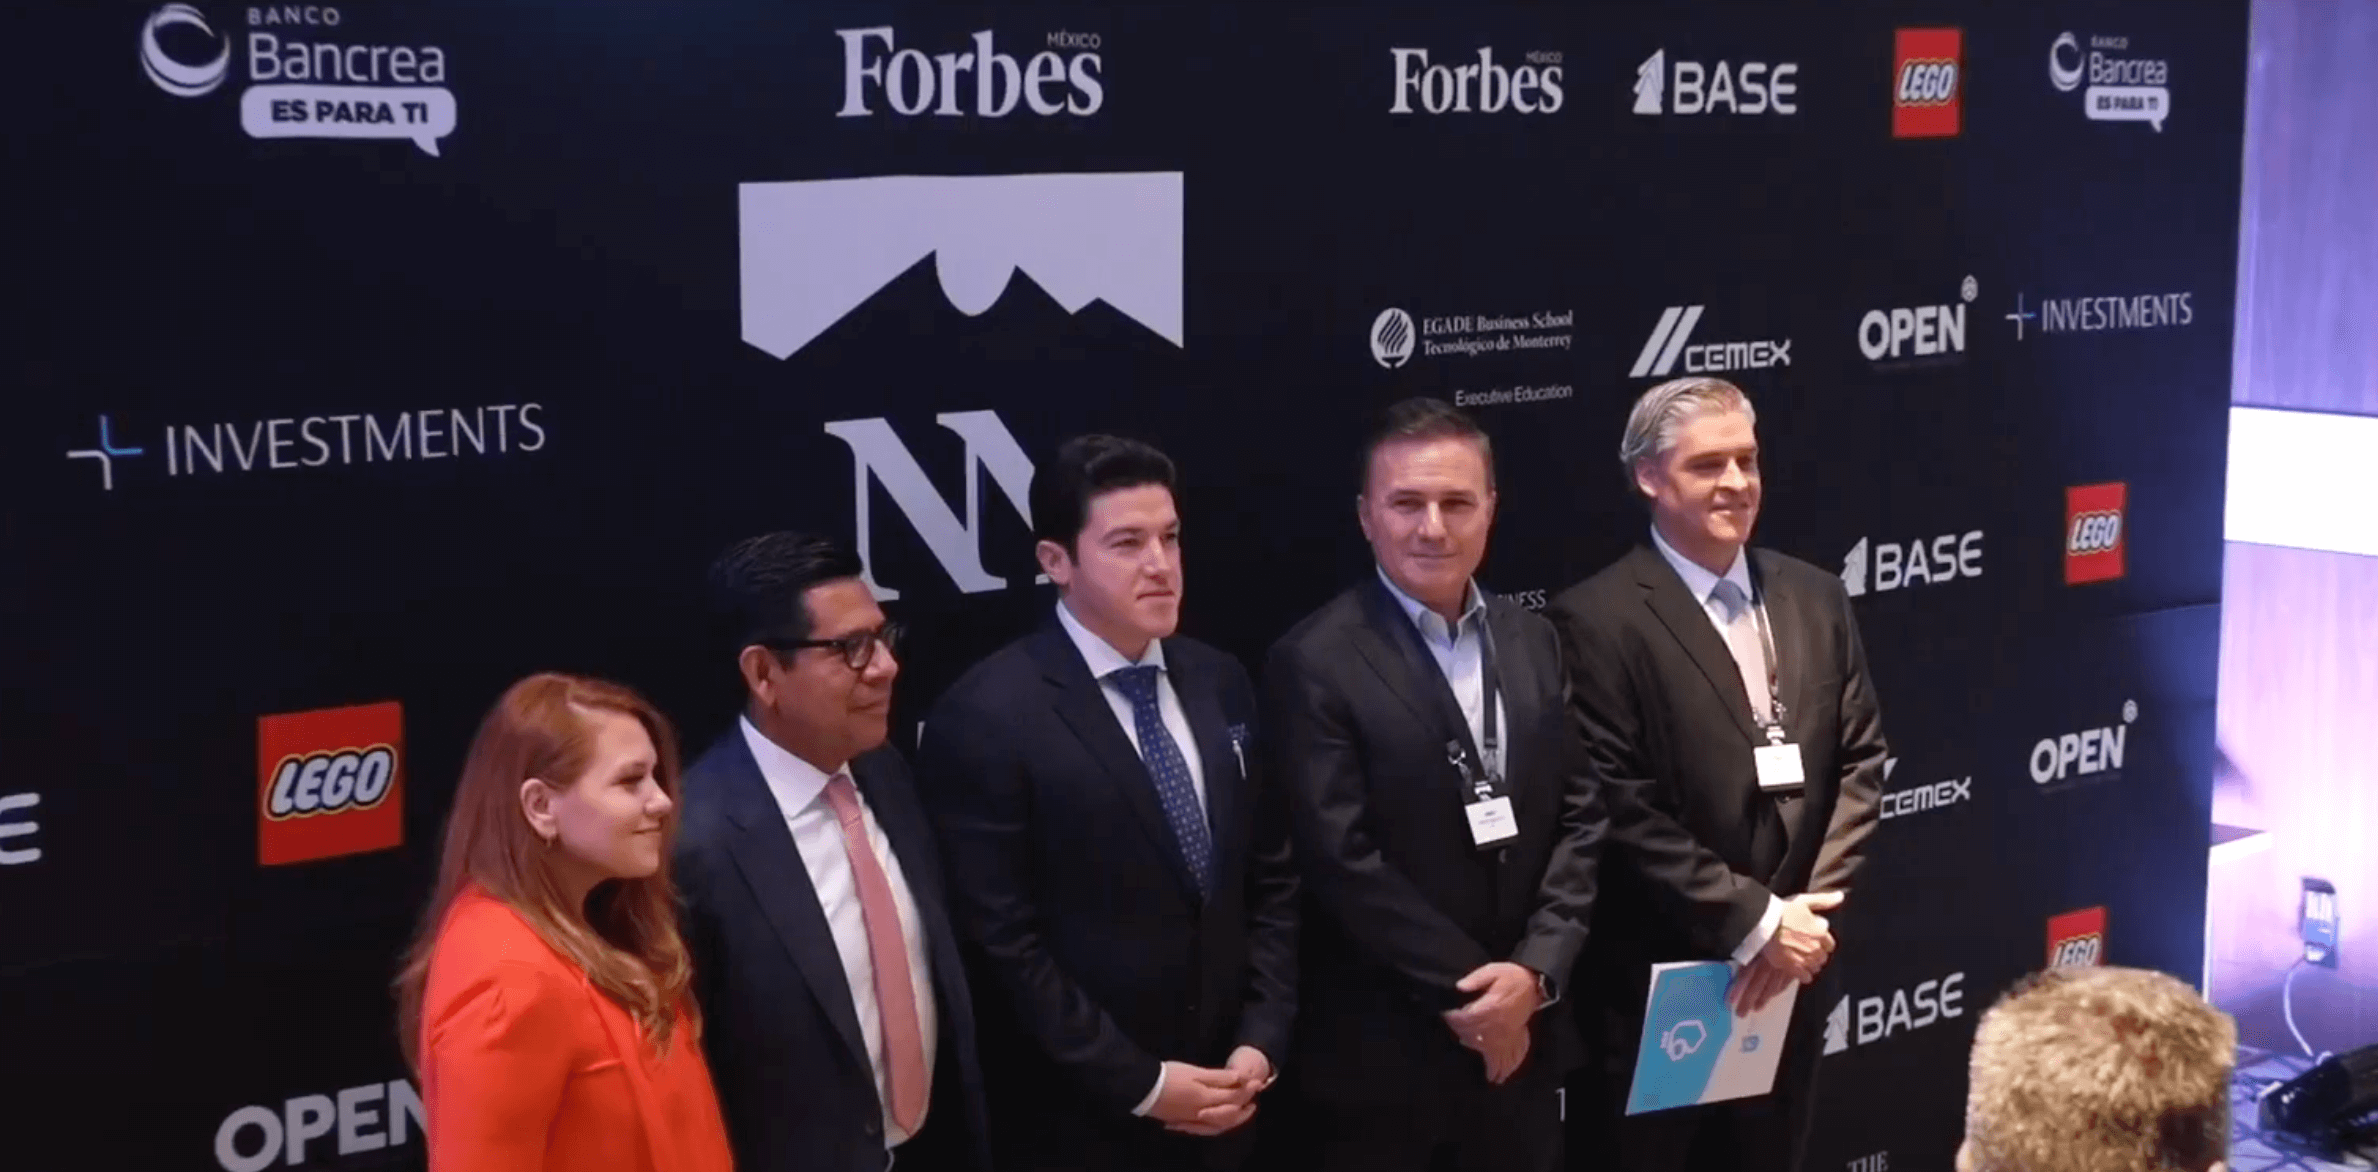 foro forbes